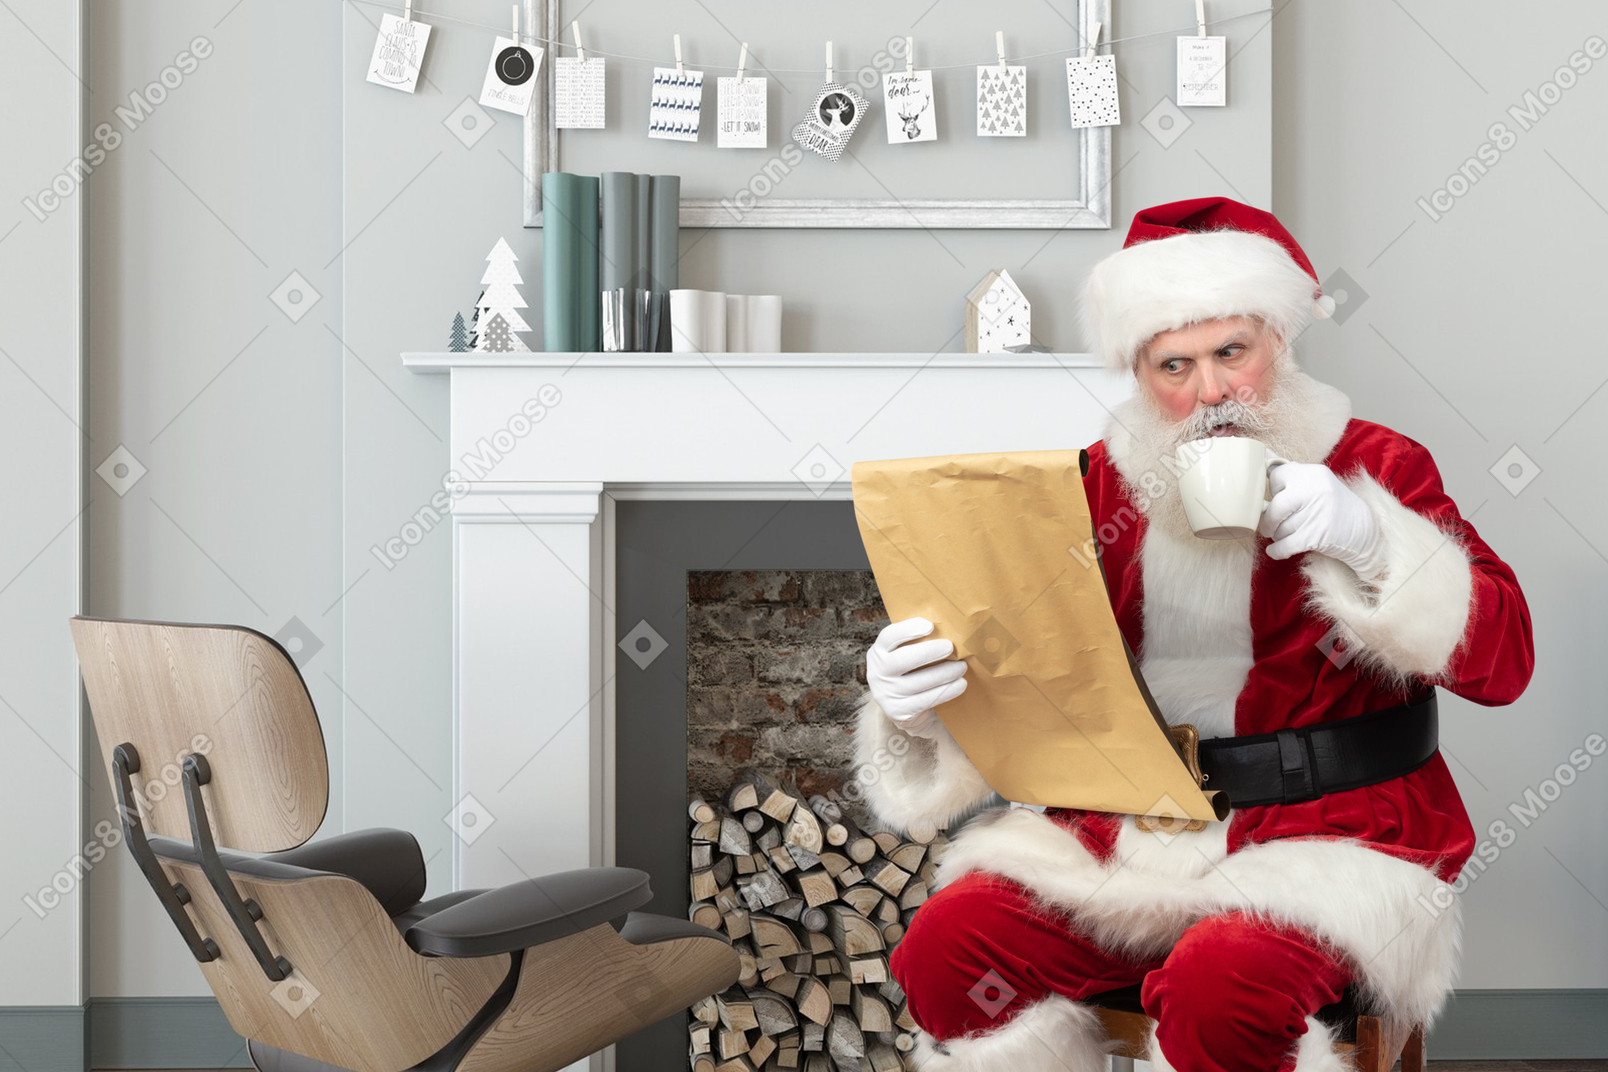 Santa claus reading gift list with a cup of coffee